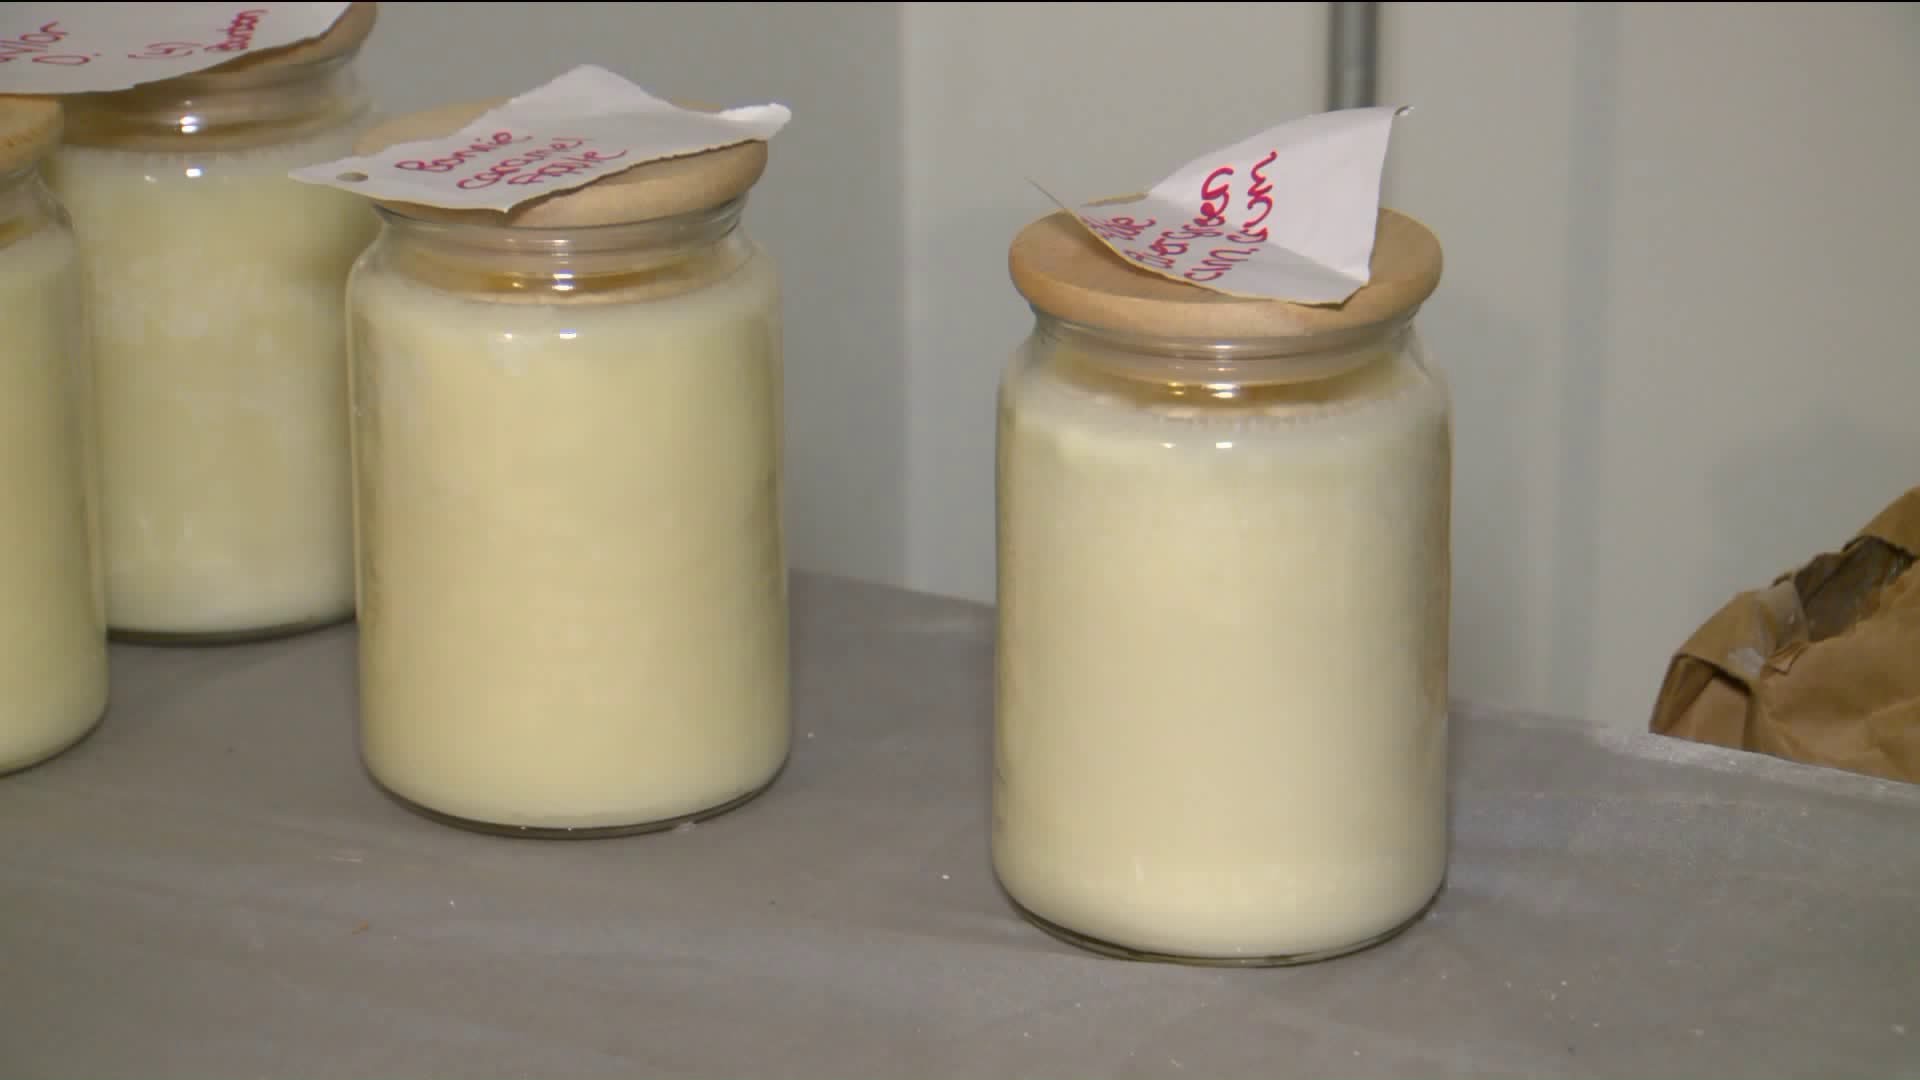 West Haven candle company looks to find cure for rare kidney condition